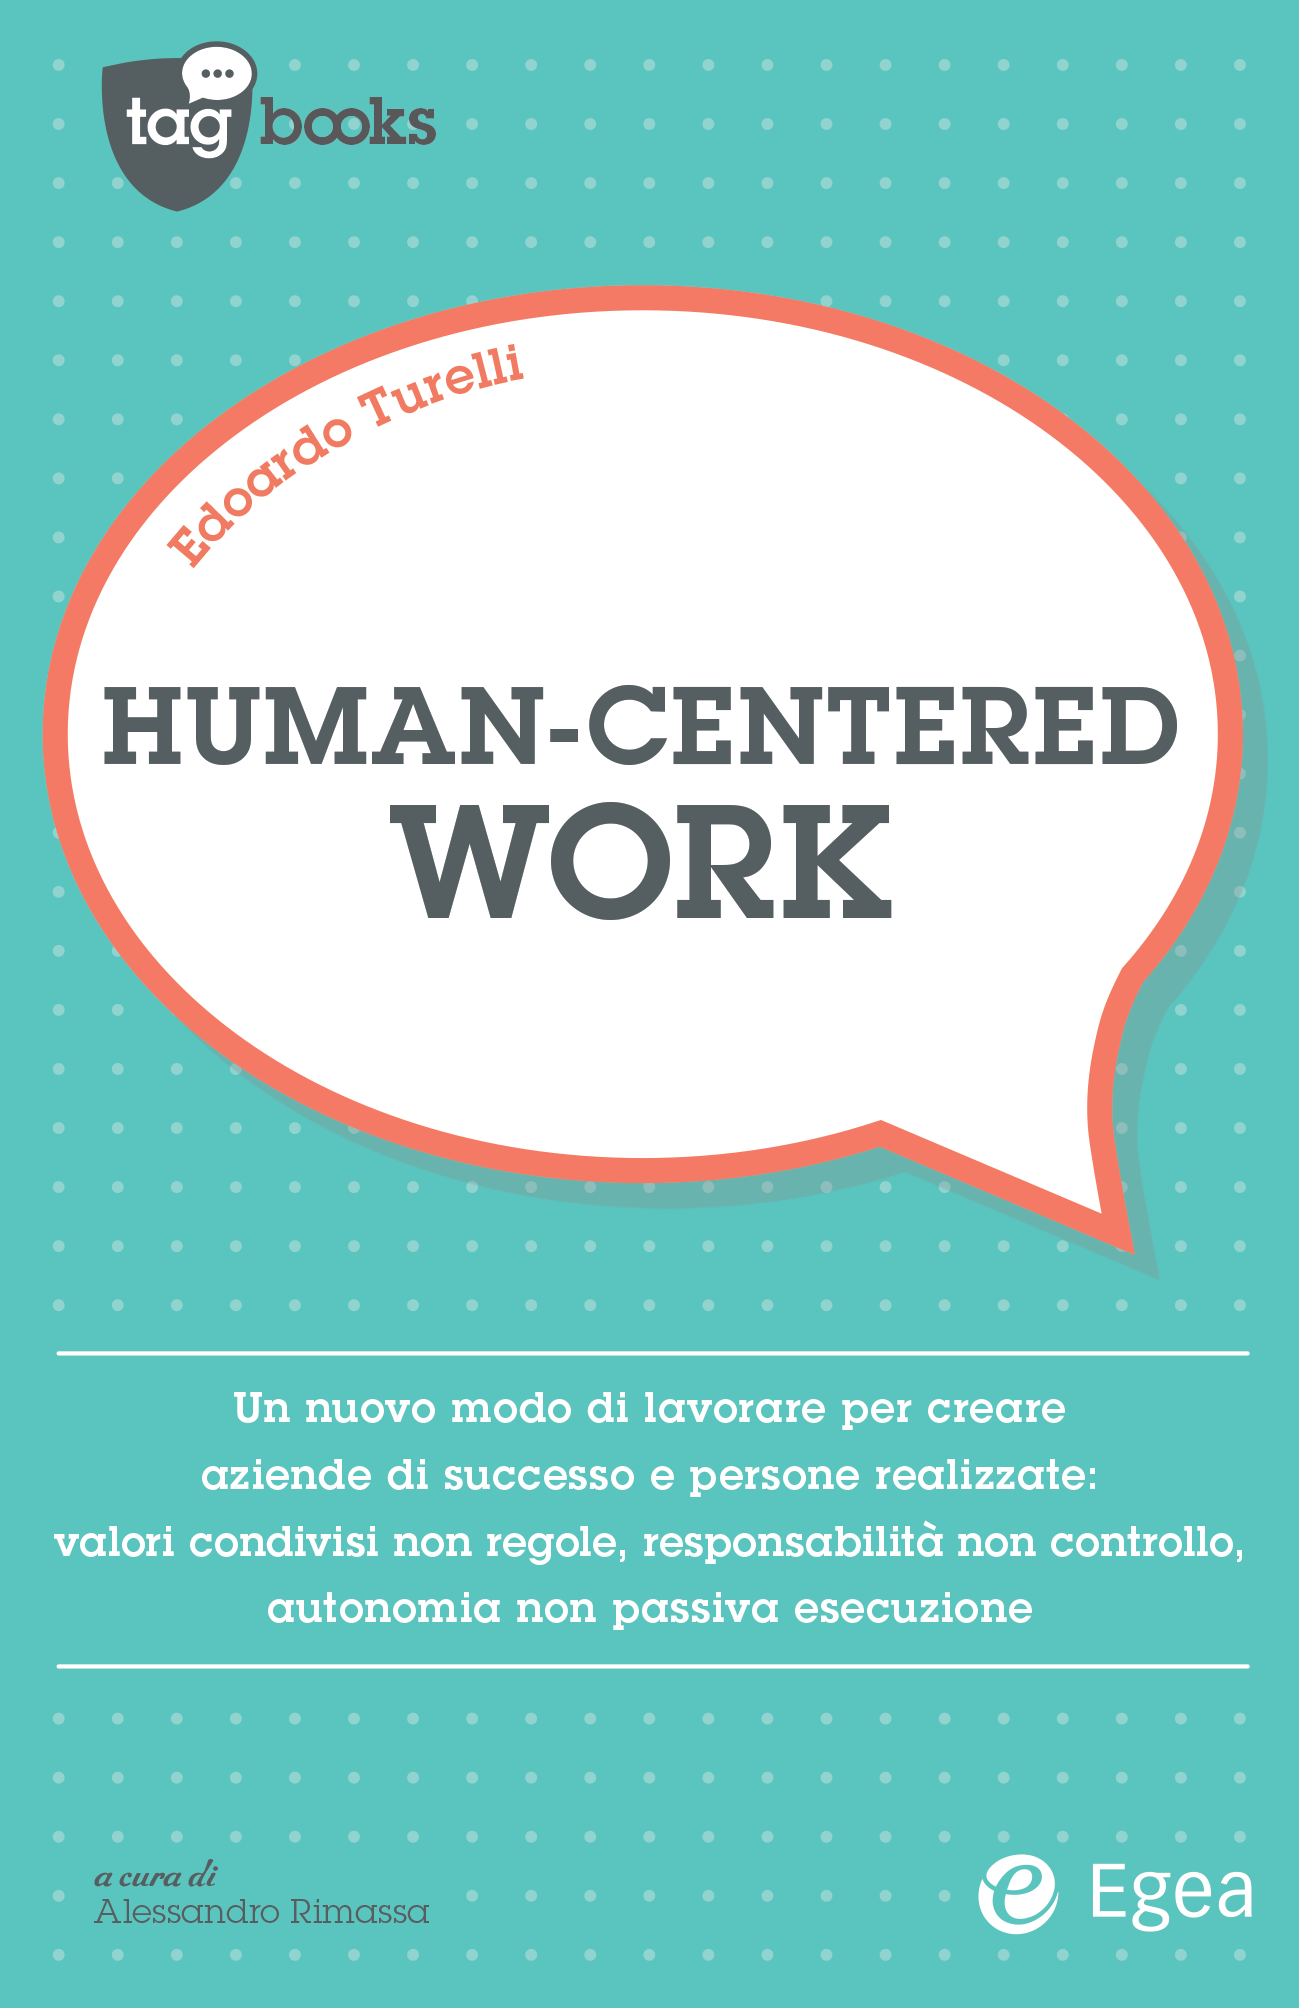 Human-Centered Work - Cover Copertina.png